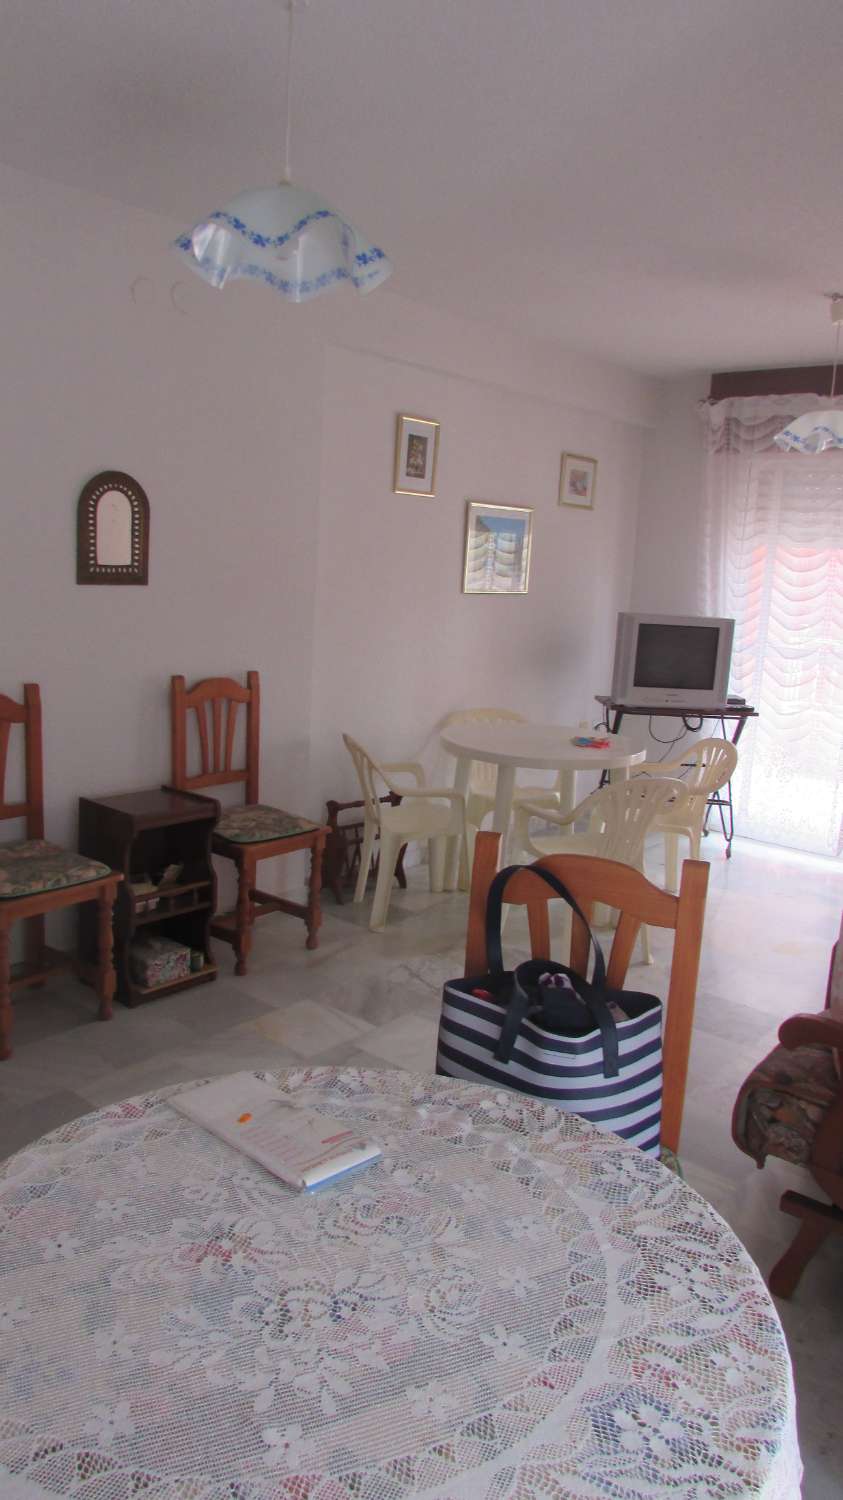 Apartment for sale in Calahonda, very bright and close to the beach